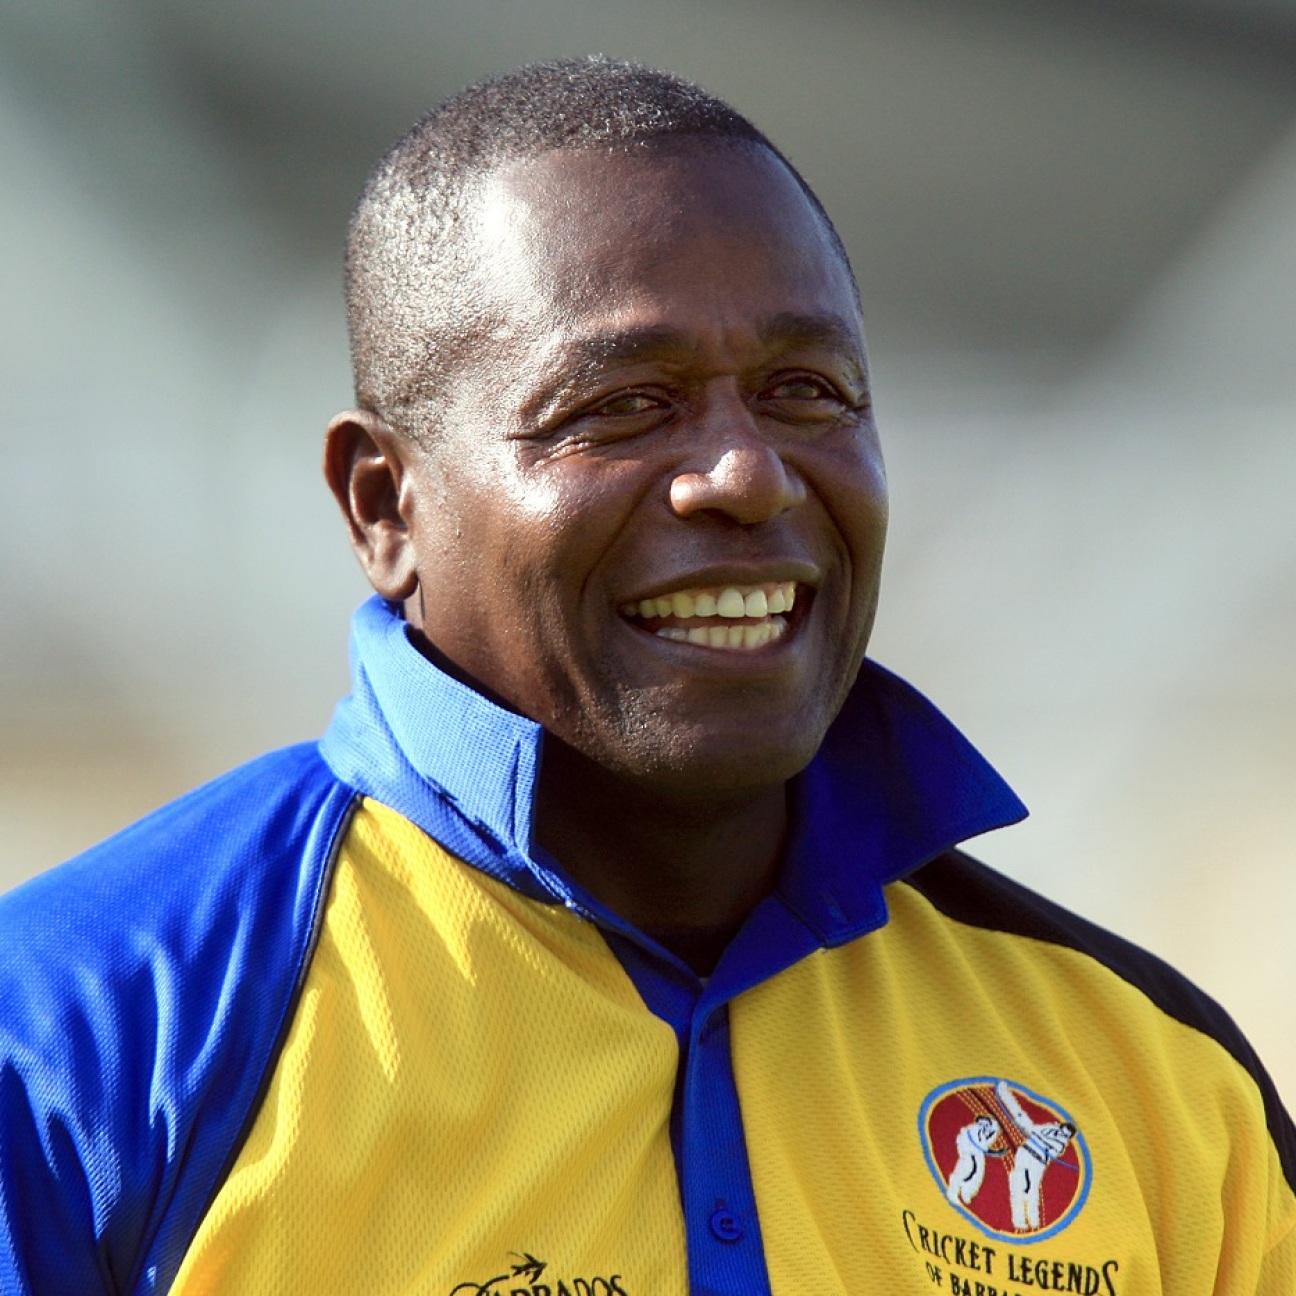 “If You’re A Good Player, You Can Play Any Form” – West Indies Selector Desmond Haynes